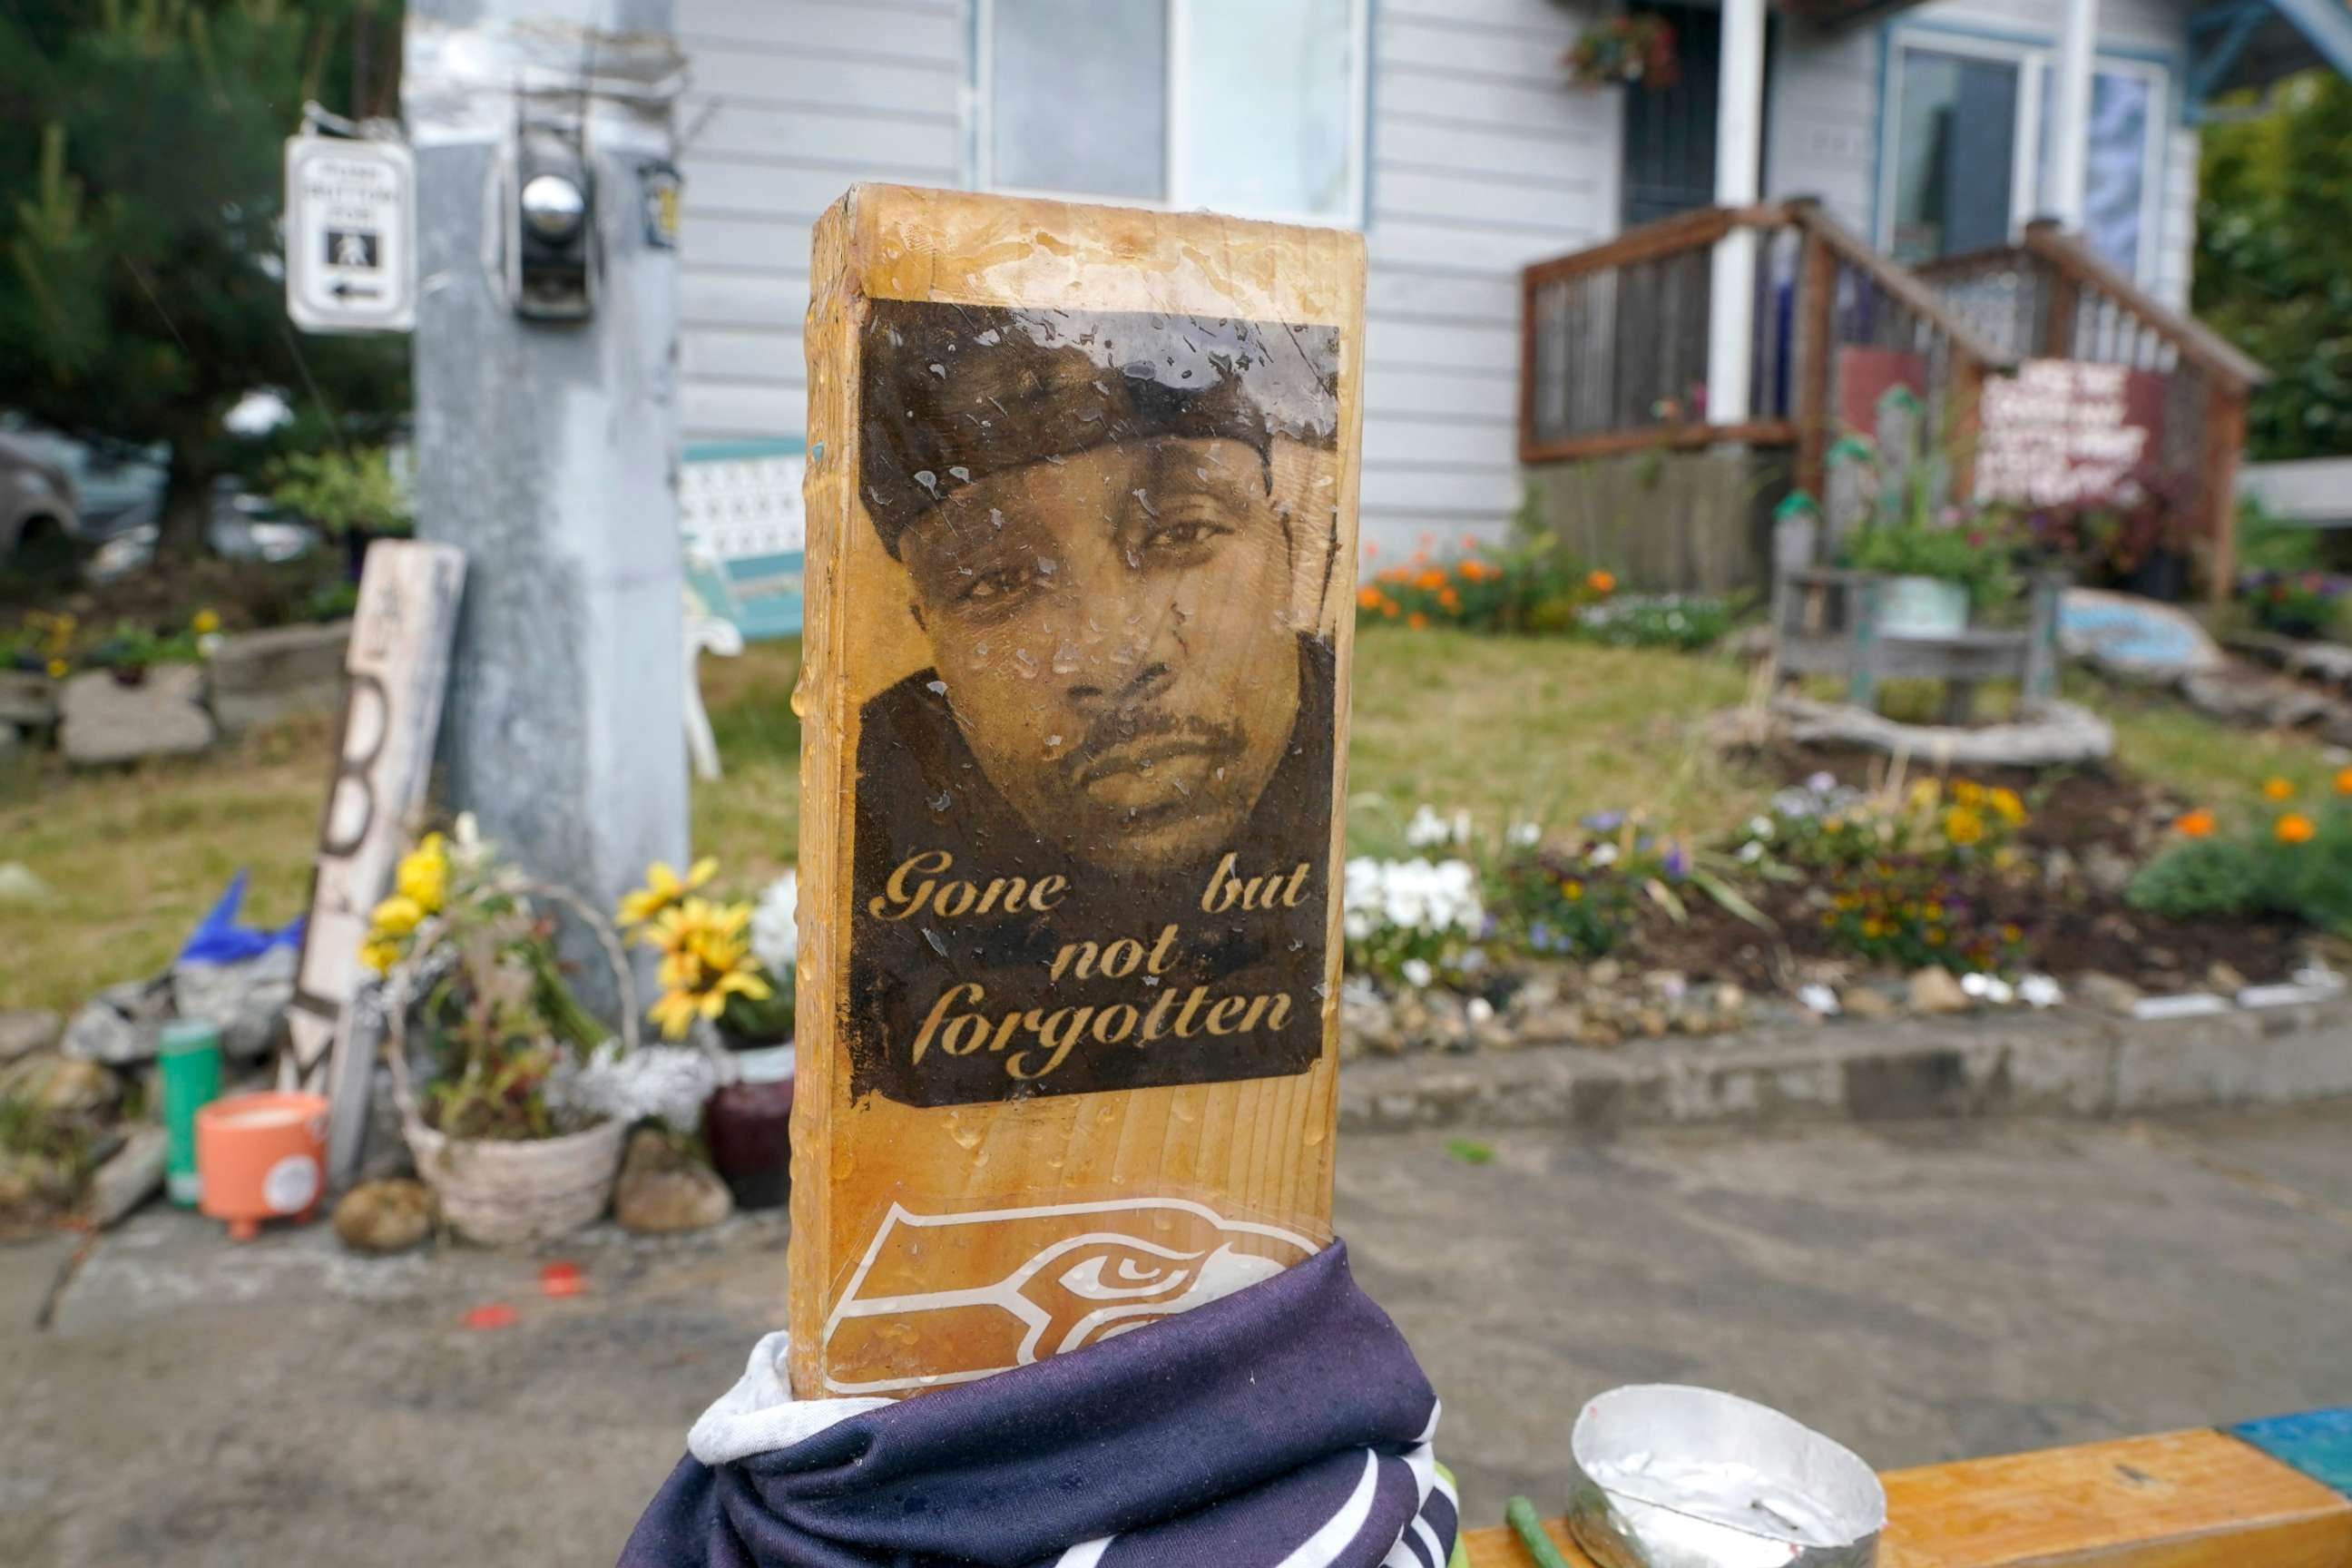 PHOTO: A sign that reads "gone but not forgotten" is shown on a cross displayed at a makeshift memorial on May 27, 2021, at the intersection in Tacoma, Washington, where Manuel "Manny" Ellis" died after he was restrained by police on March 3, 2020.